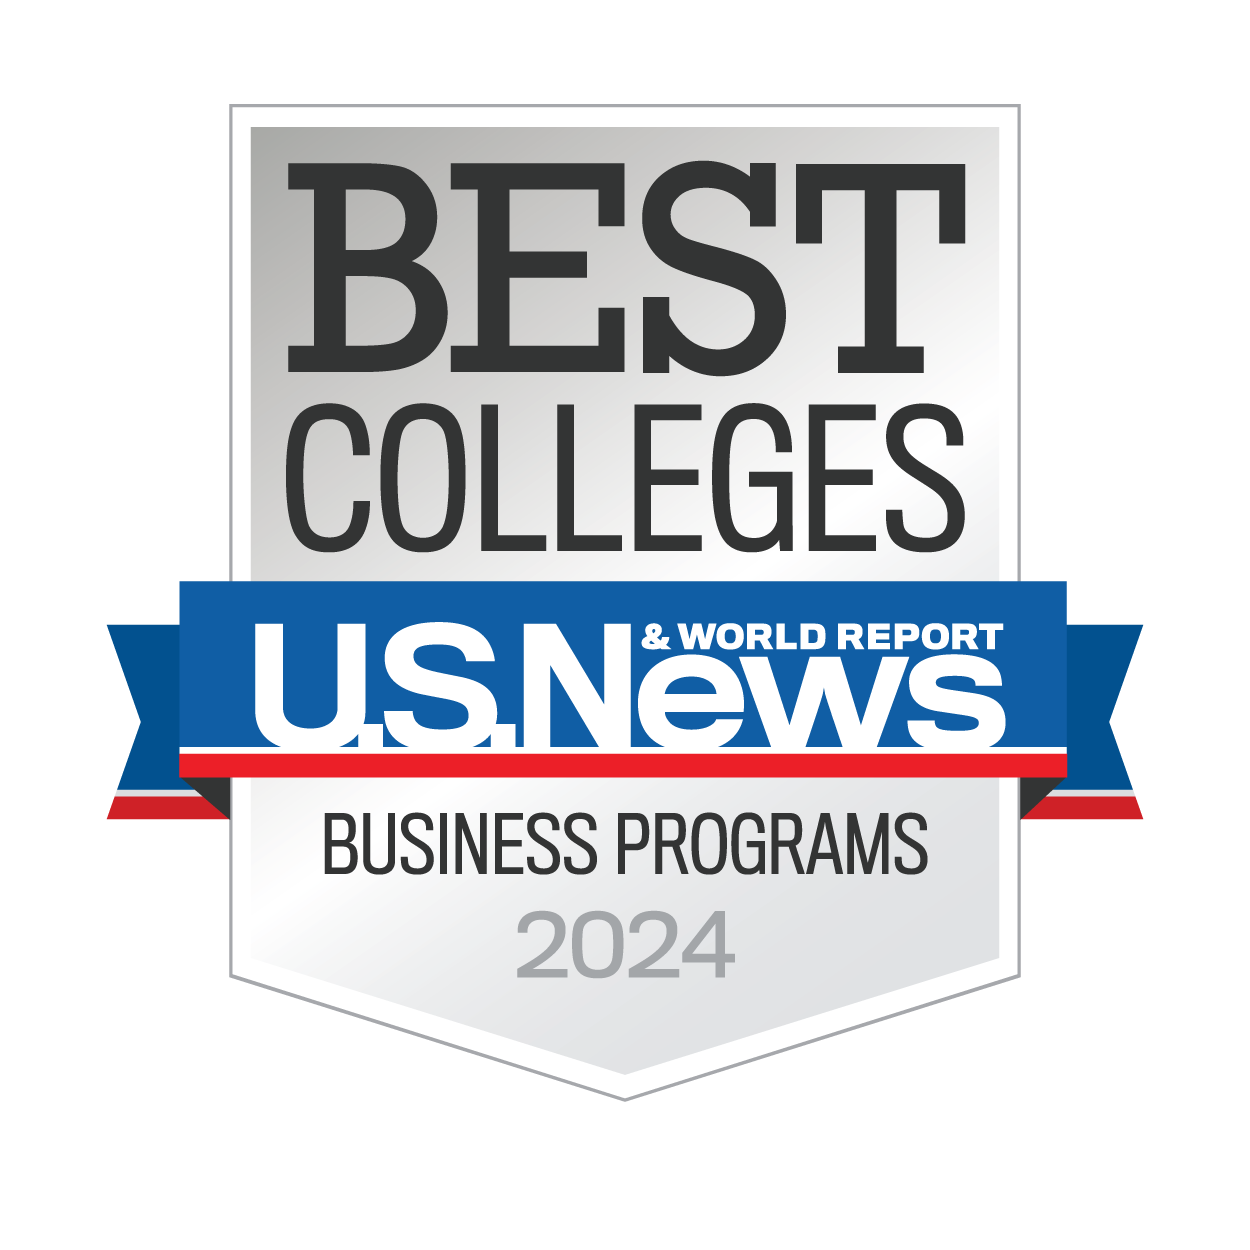 Best Colleges US News Business Programs 2024